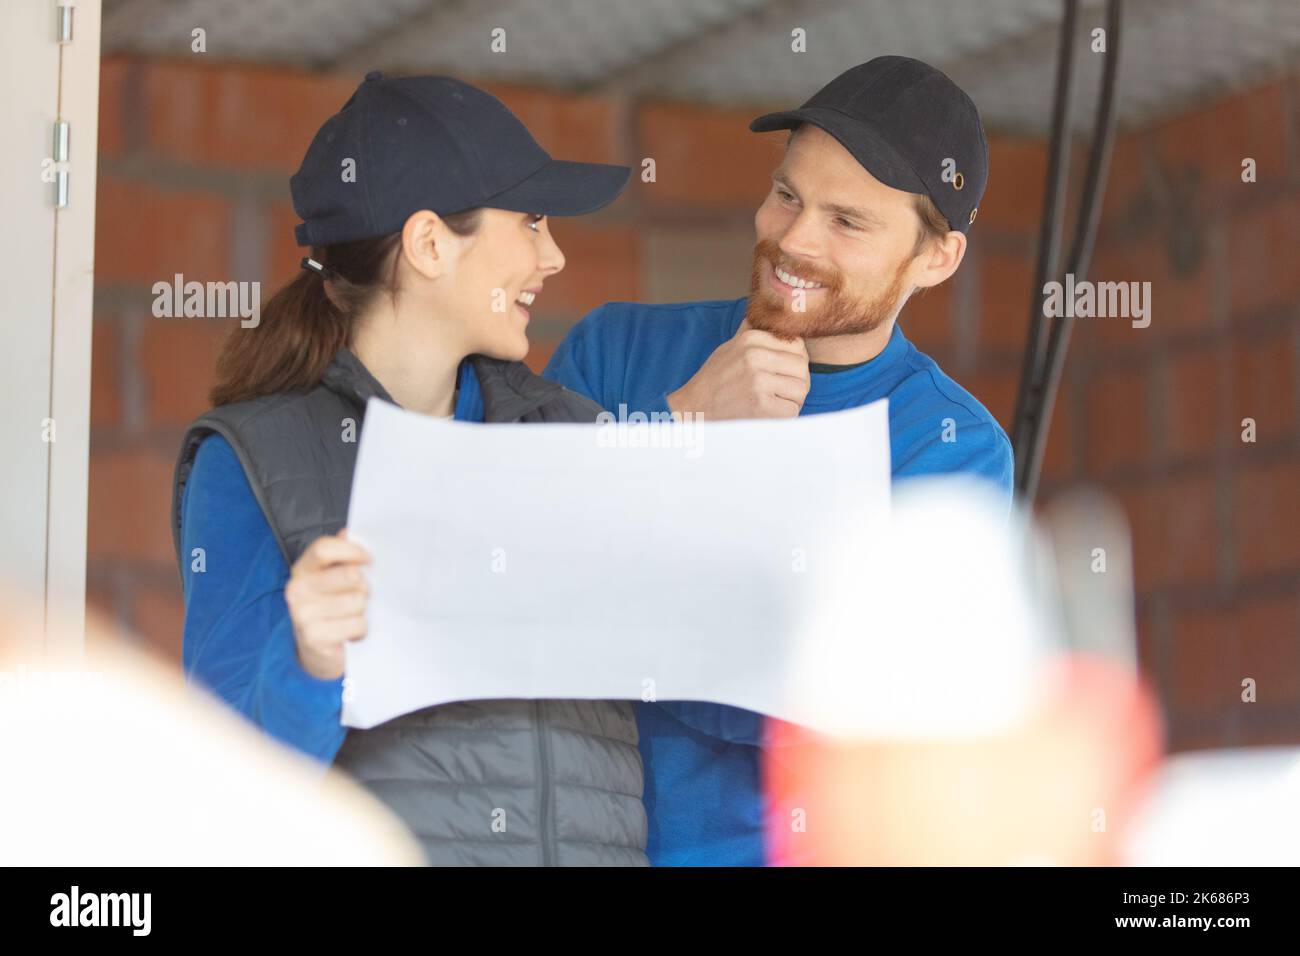 female engineer or architect checking interior building with construction worker Stock Photo